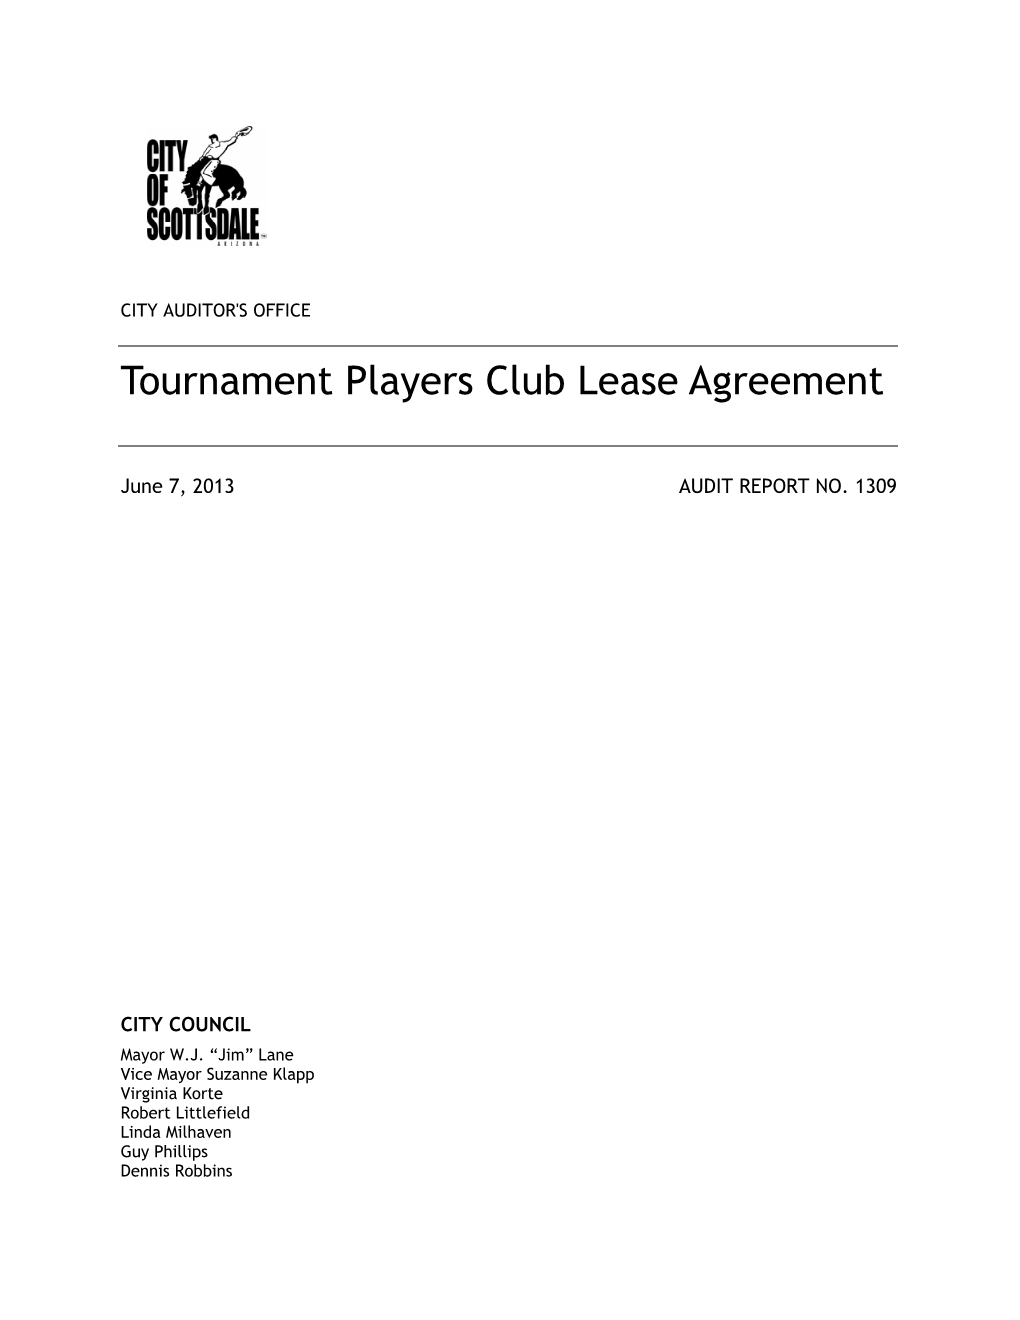 Tournament Players Club Lease Agreement